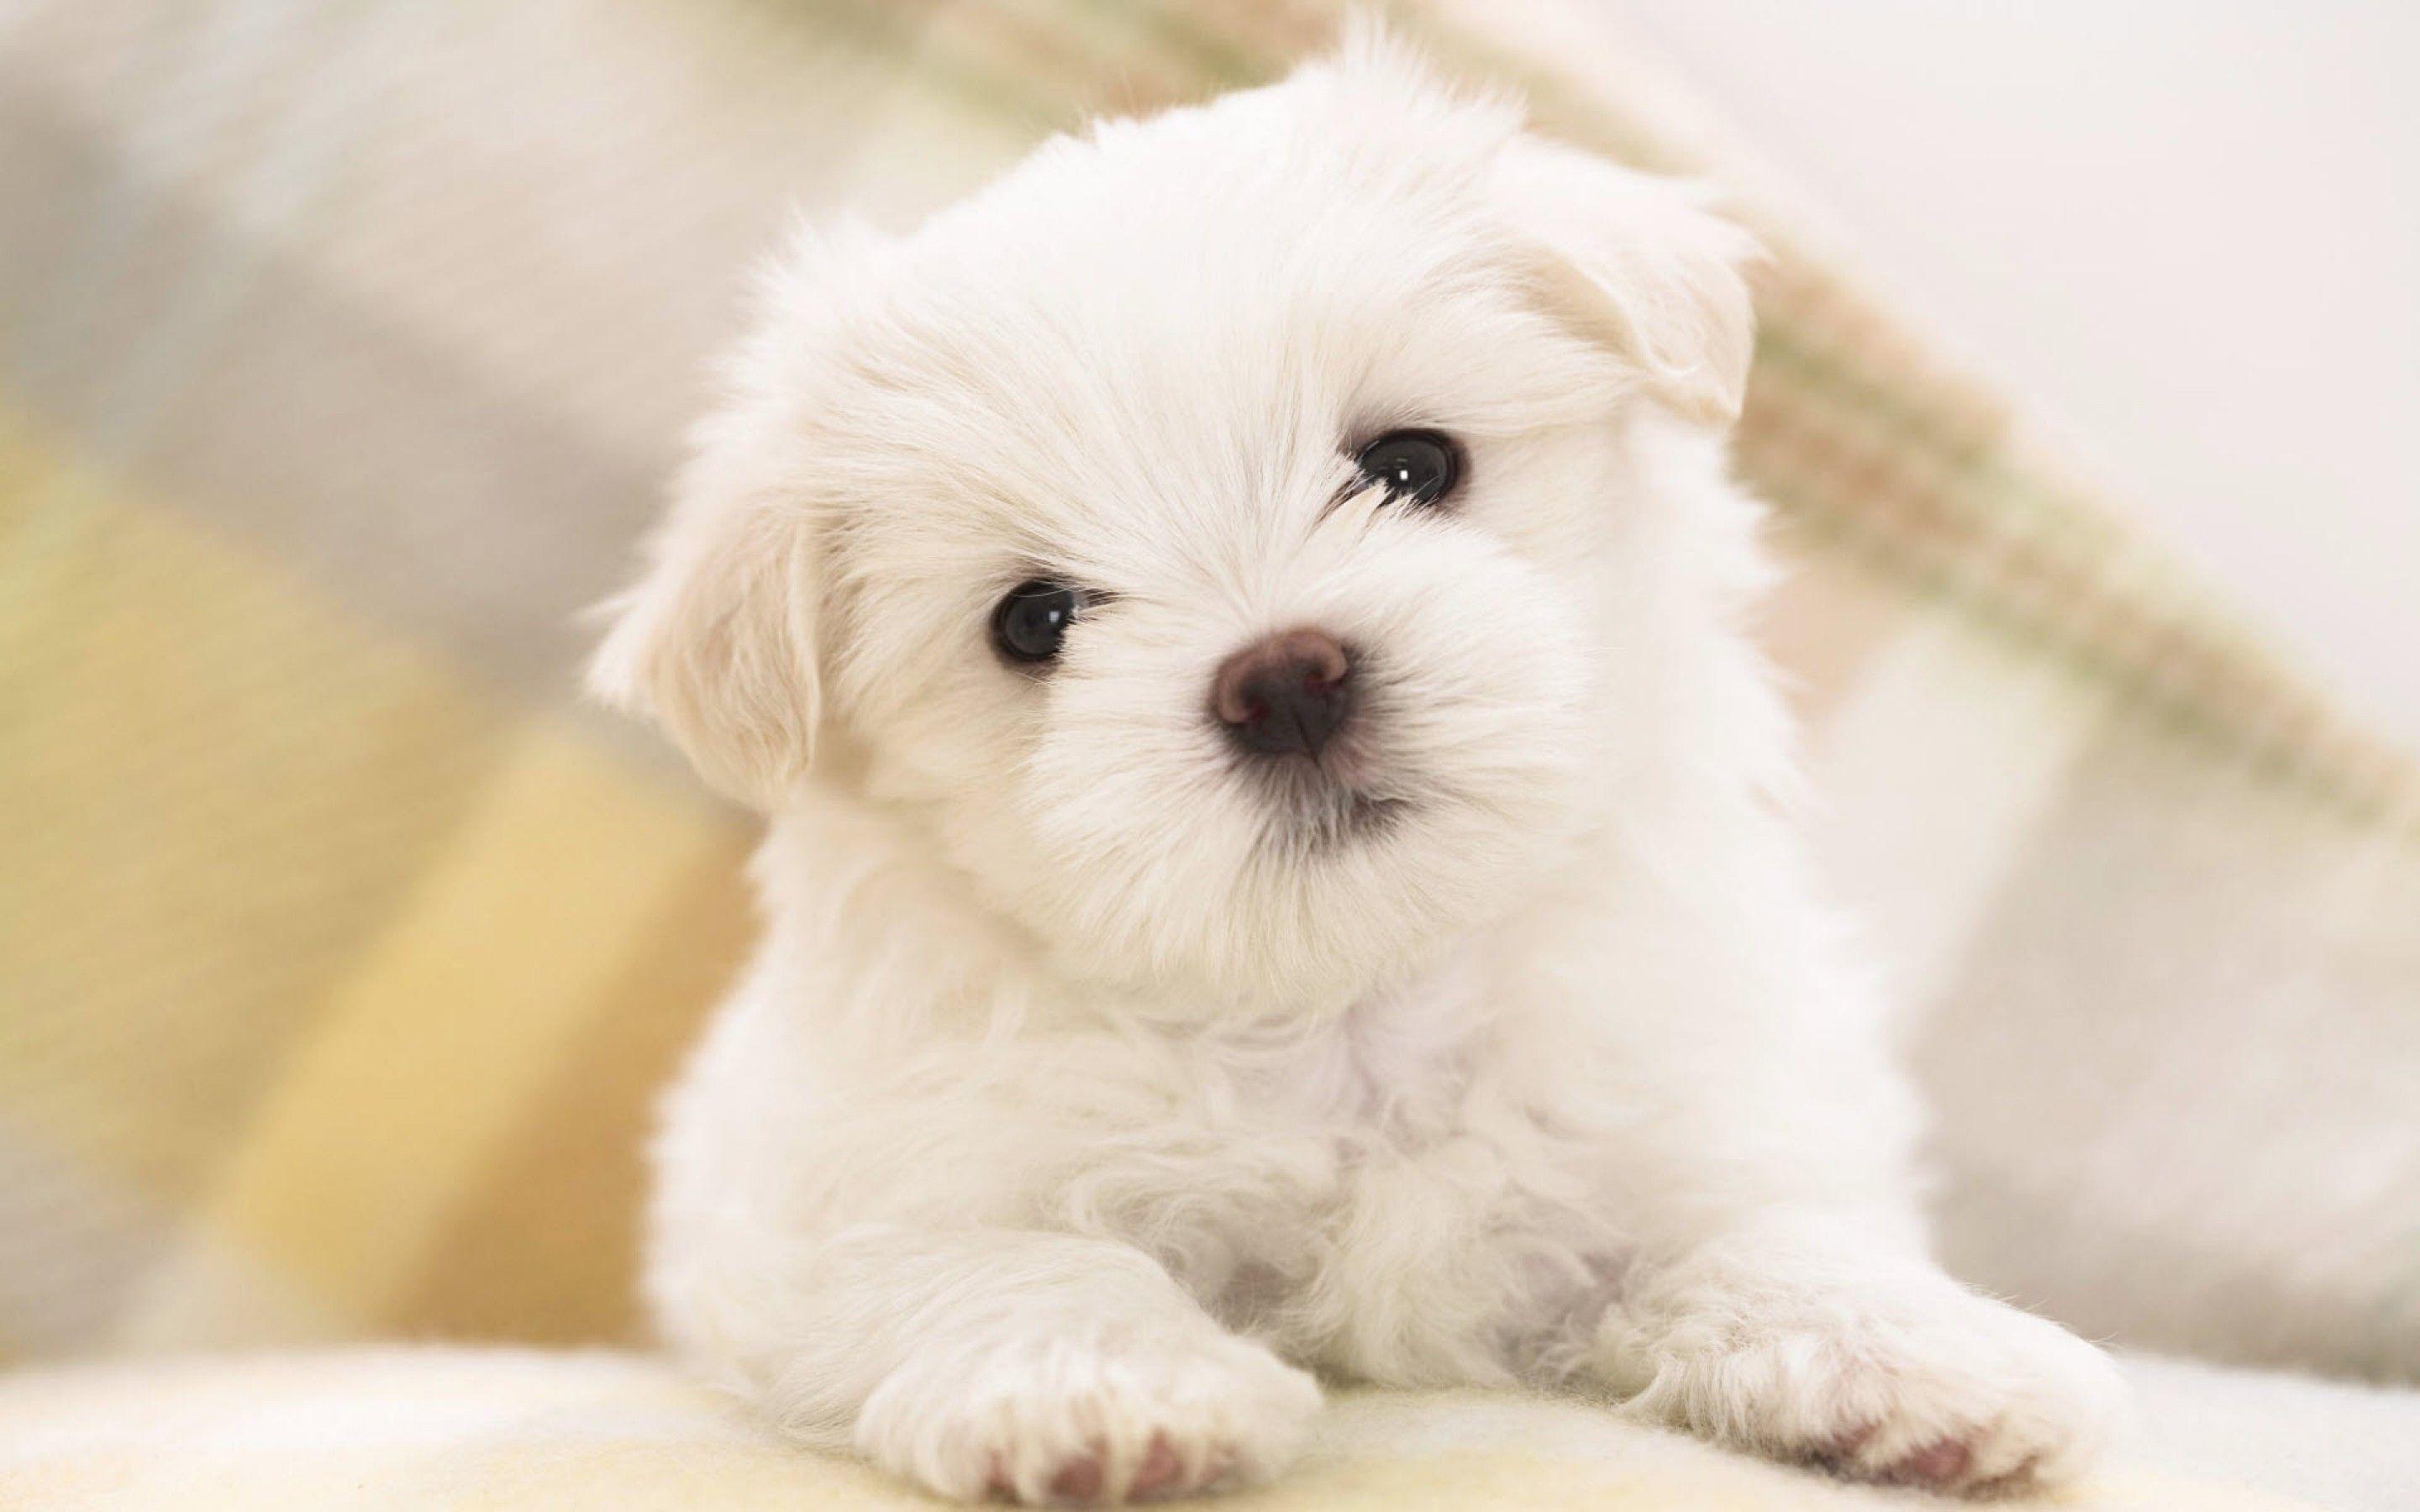 Puppy Wallpapers Hd - Wallpaper Cave